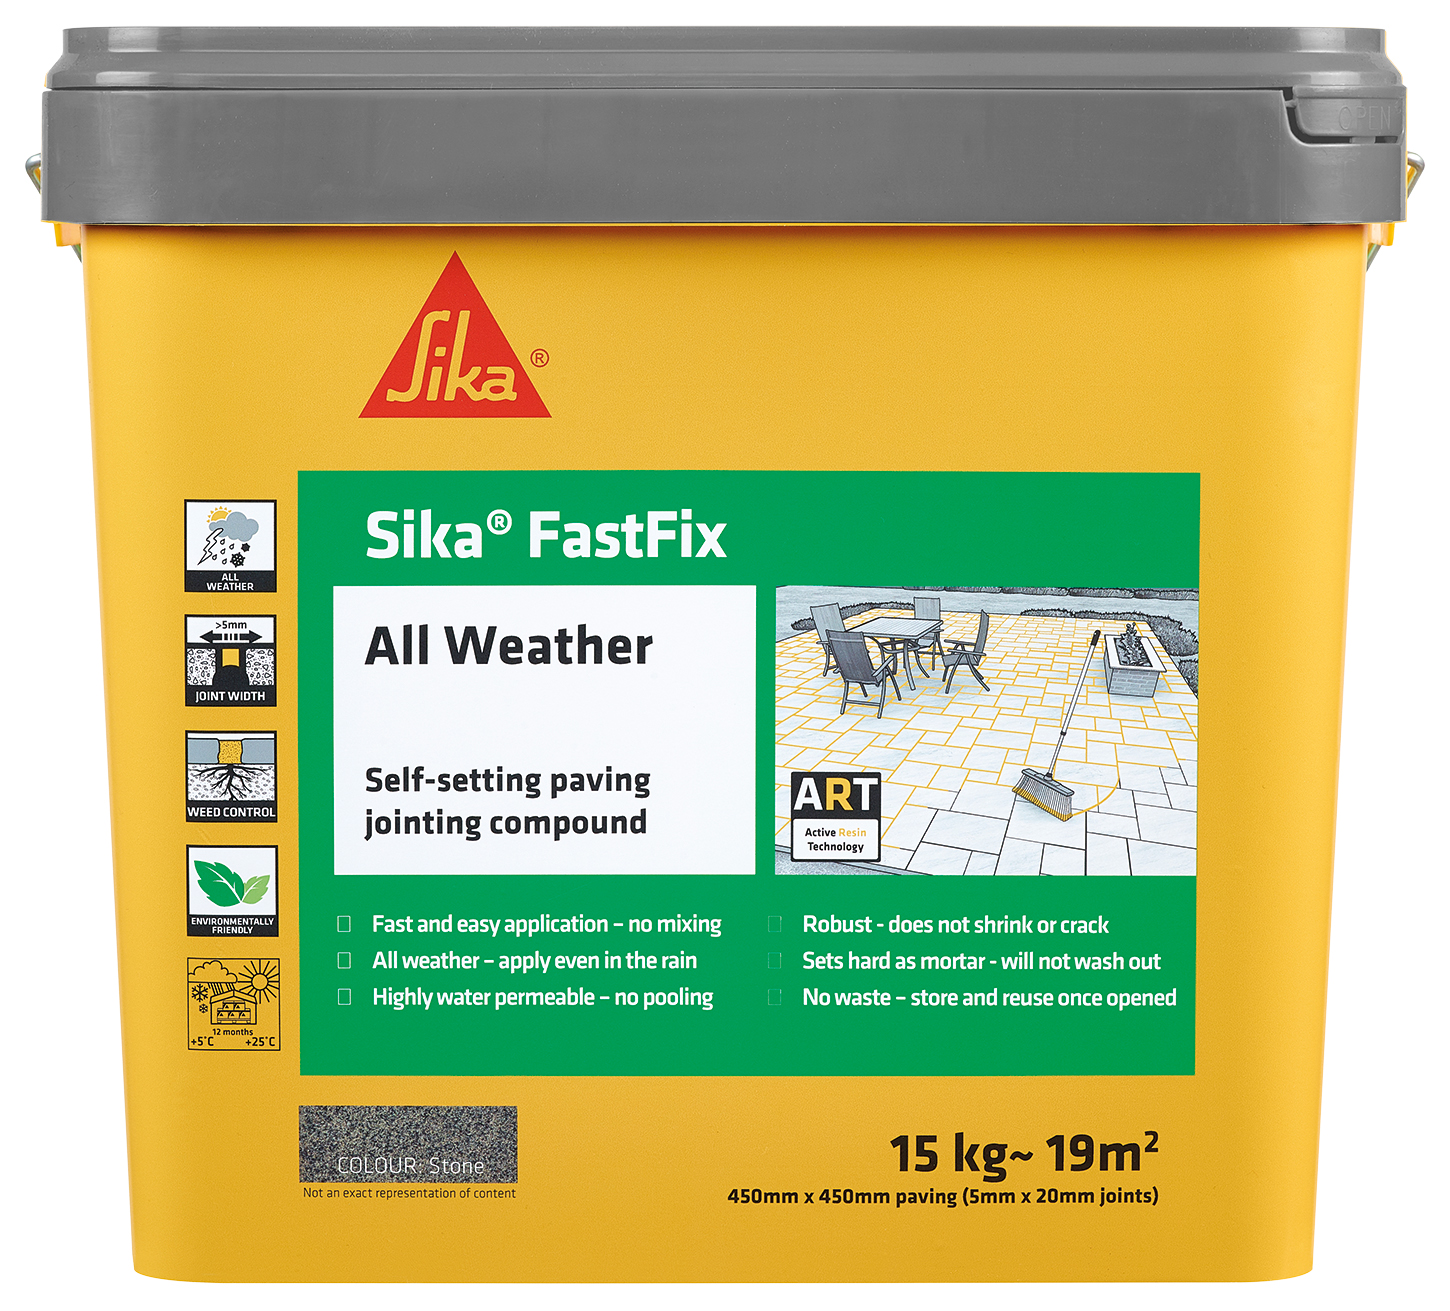 Sika FastFix All Weather Stone Paving Jointing Compound - 15kg